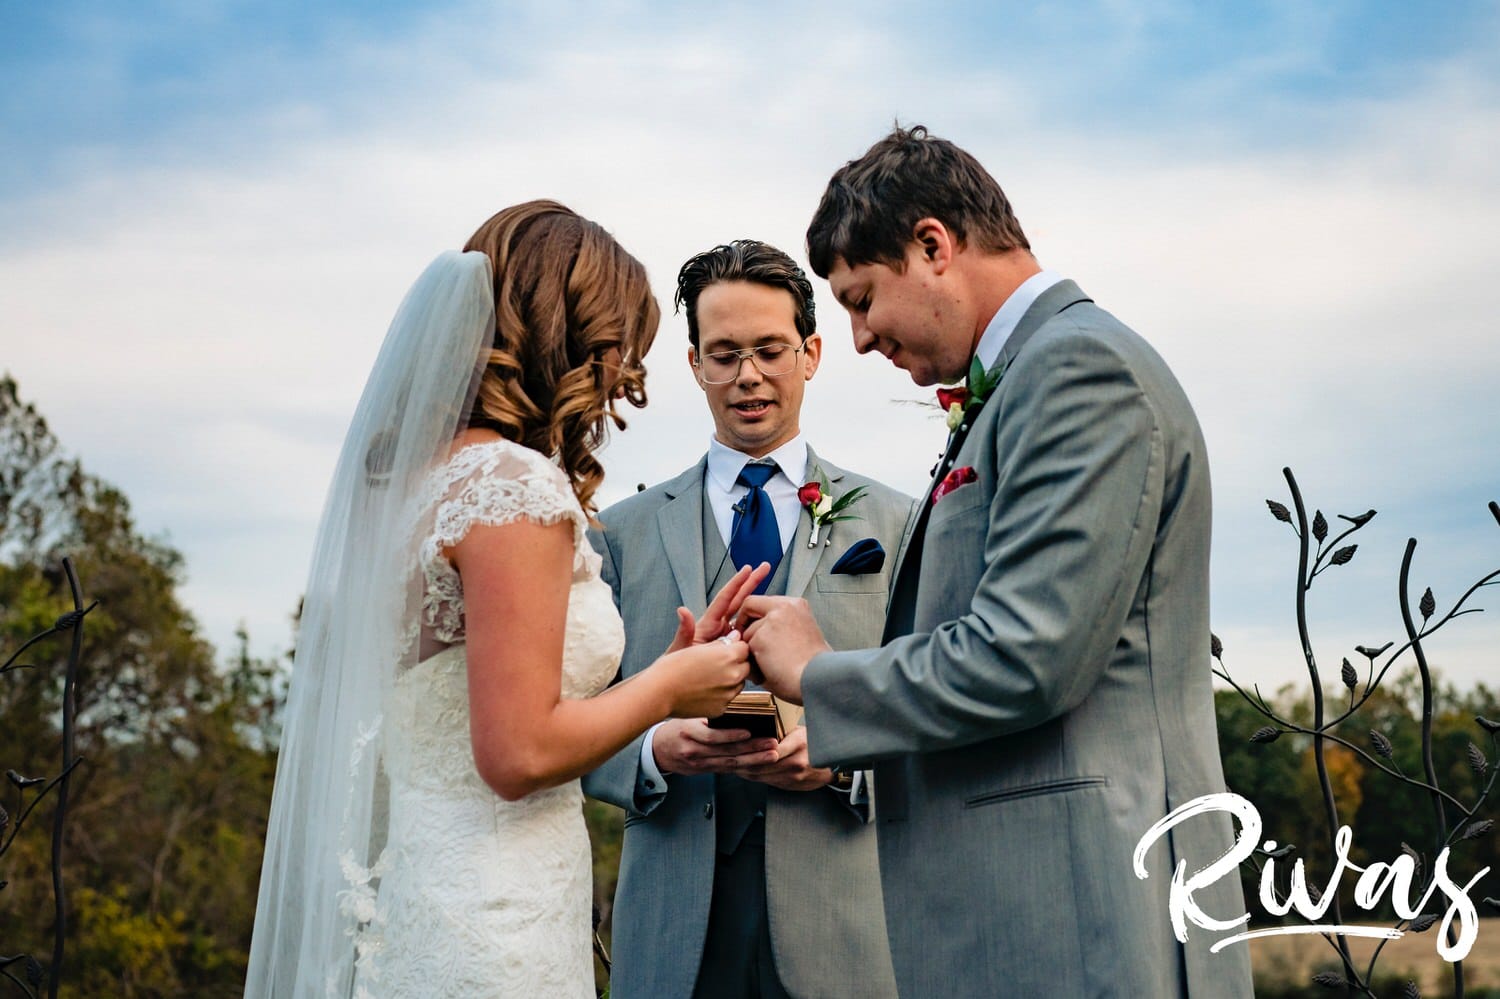 A colorful picture of a groom putting a wedding band on his bride's finger during their fall wedding ceremony. 